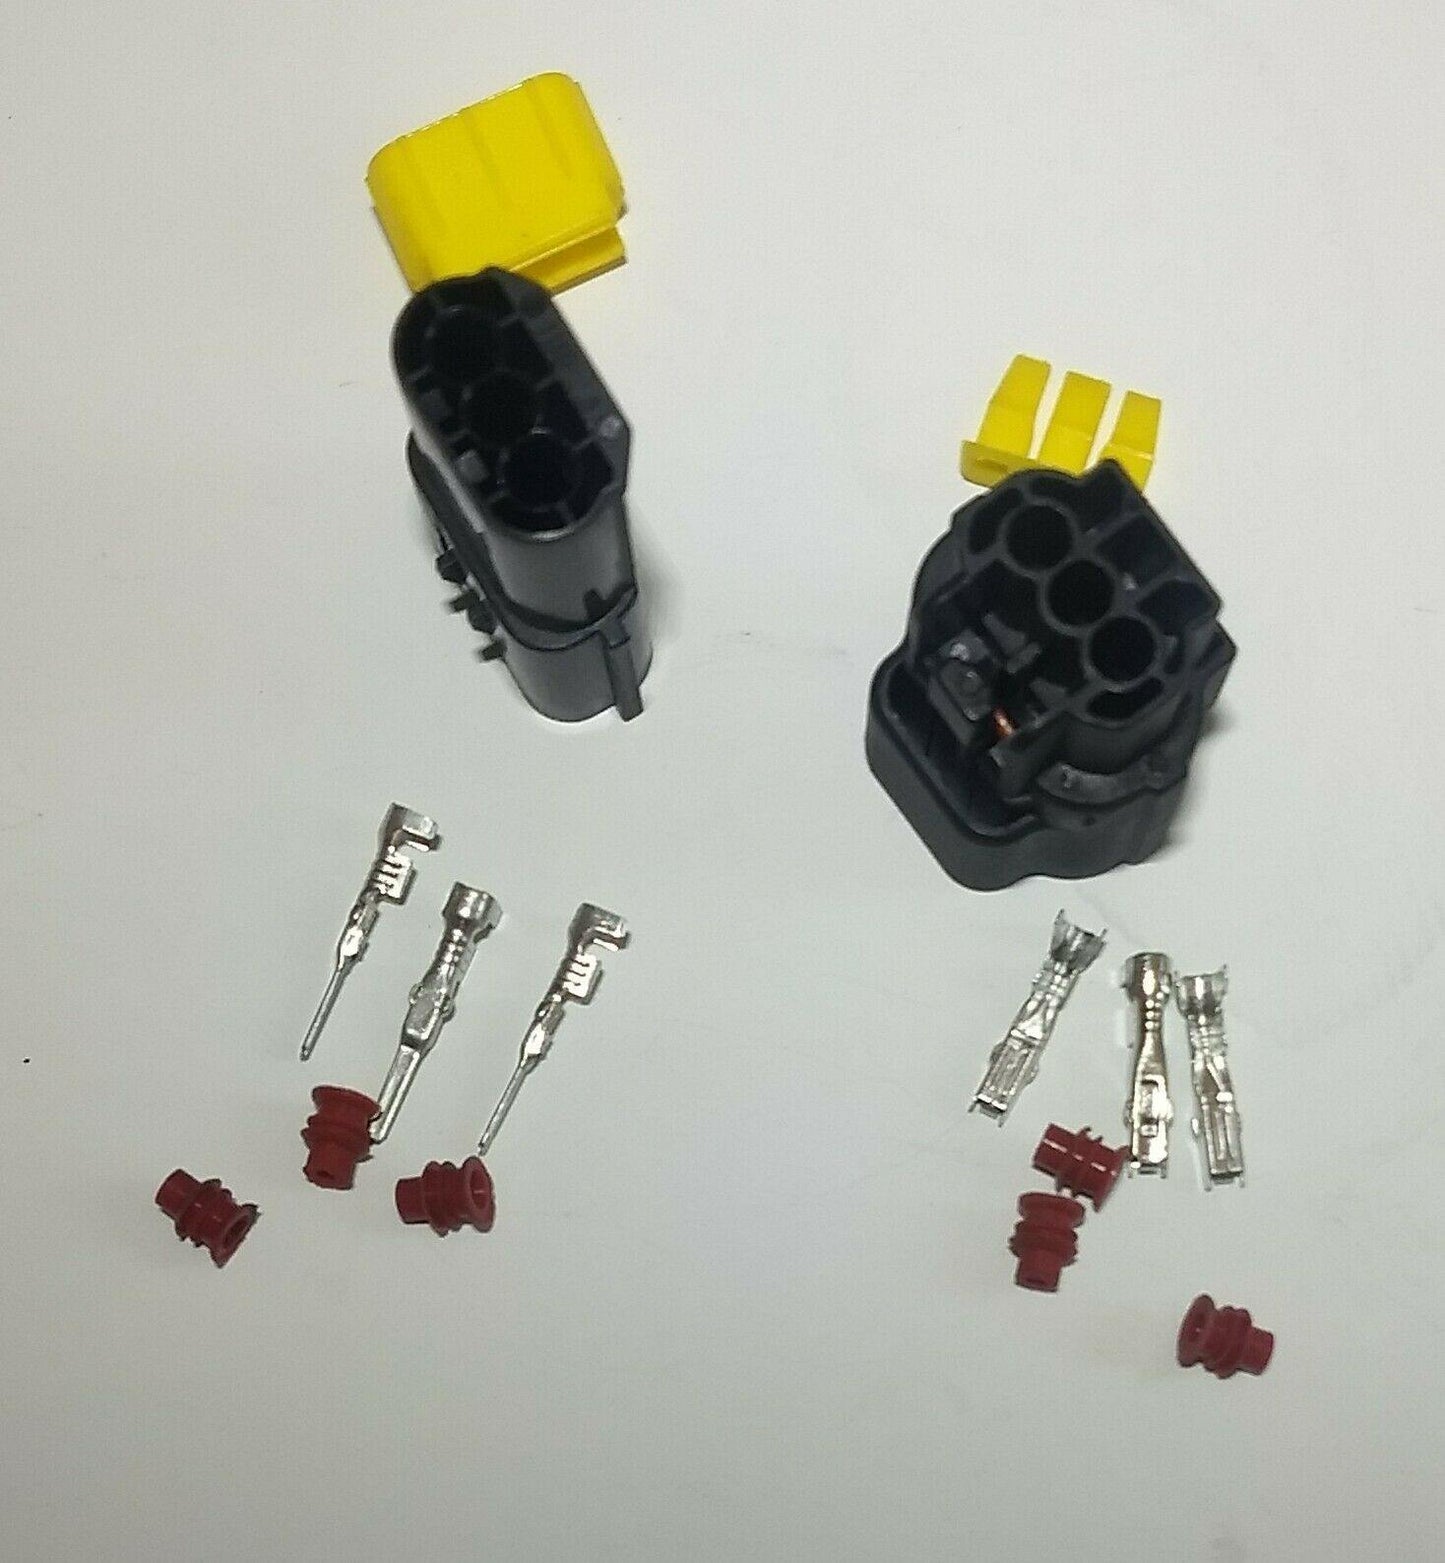 Econoseal Male & Female 3 Way Waterproof Connector Plug Kit Fits Landrover Mure - Mid-Ulster Rotating Electrics Ltd